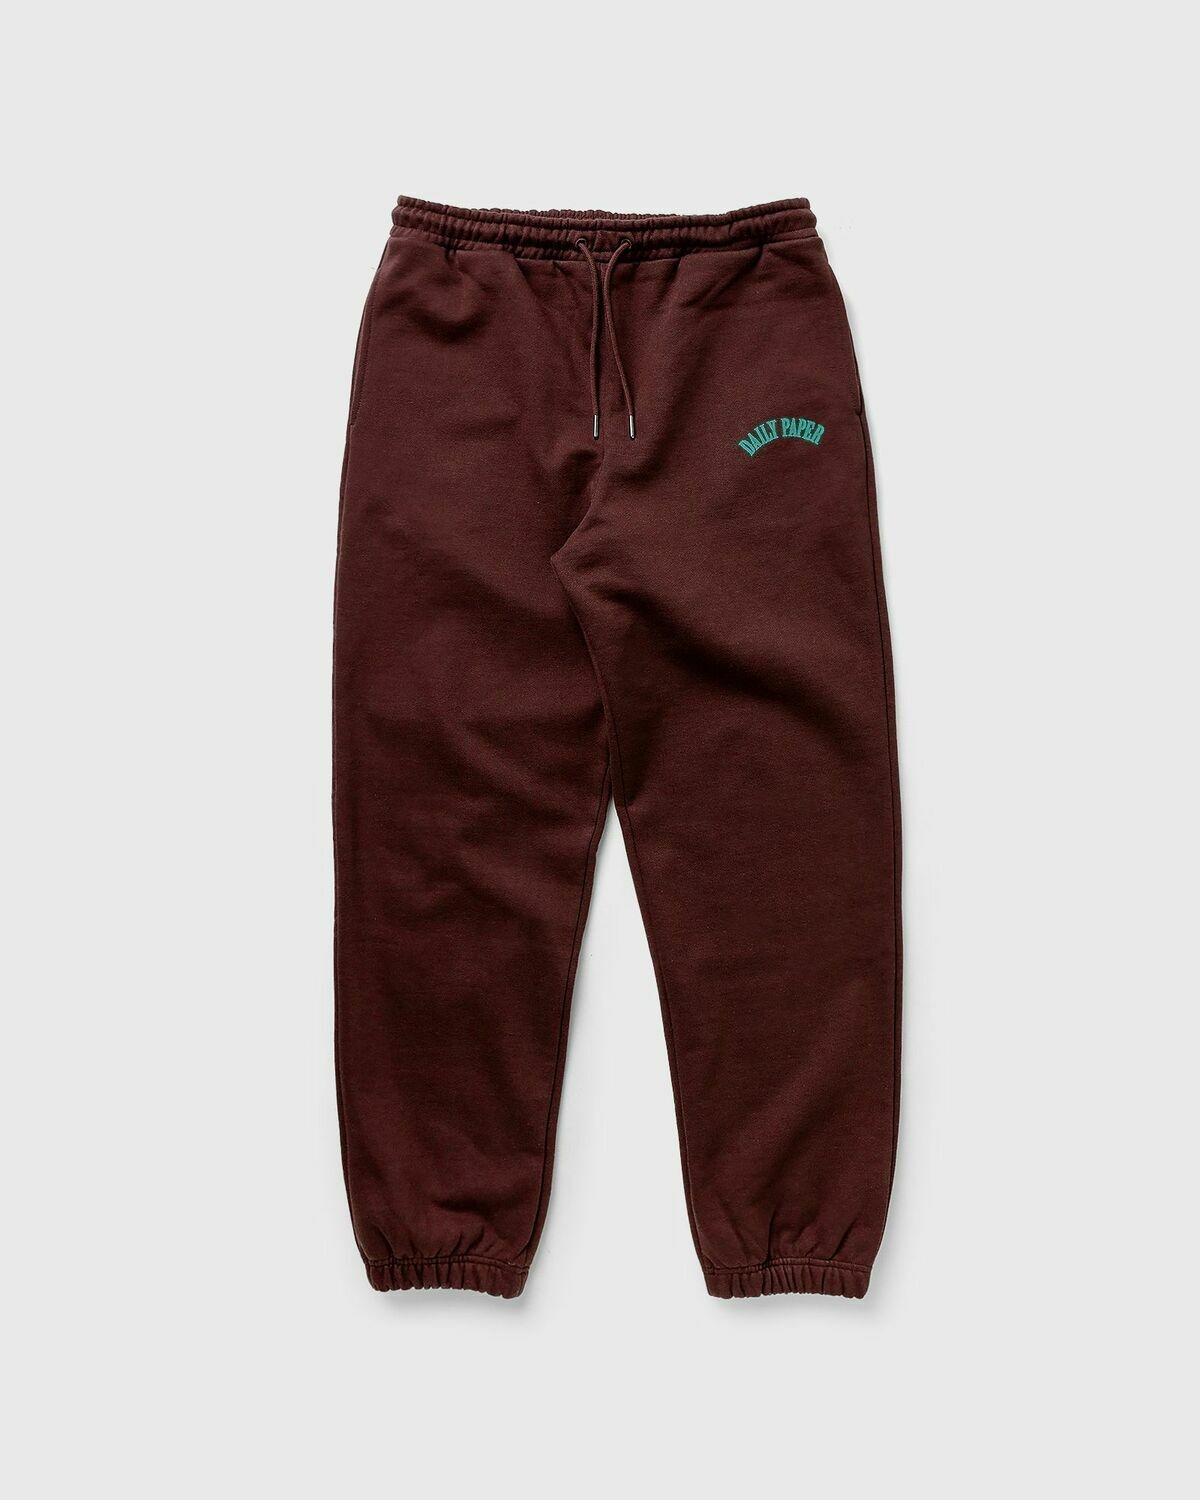 Daily Paper Howell Jog Brown - Mens - Sweatpants Daily Paper